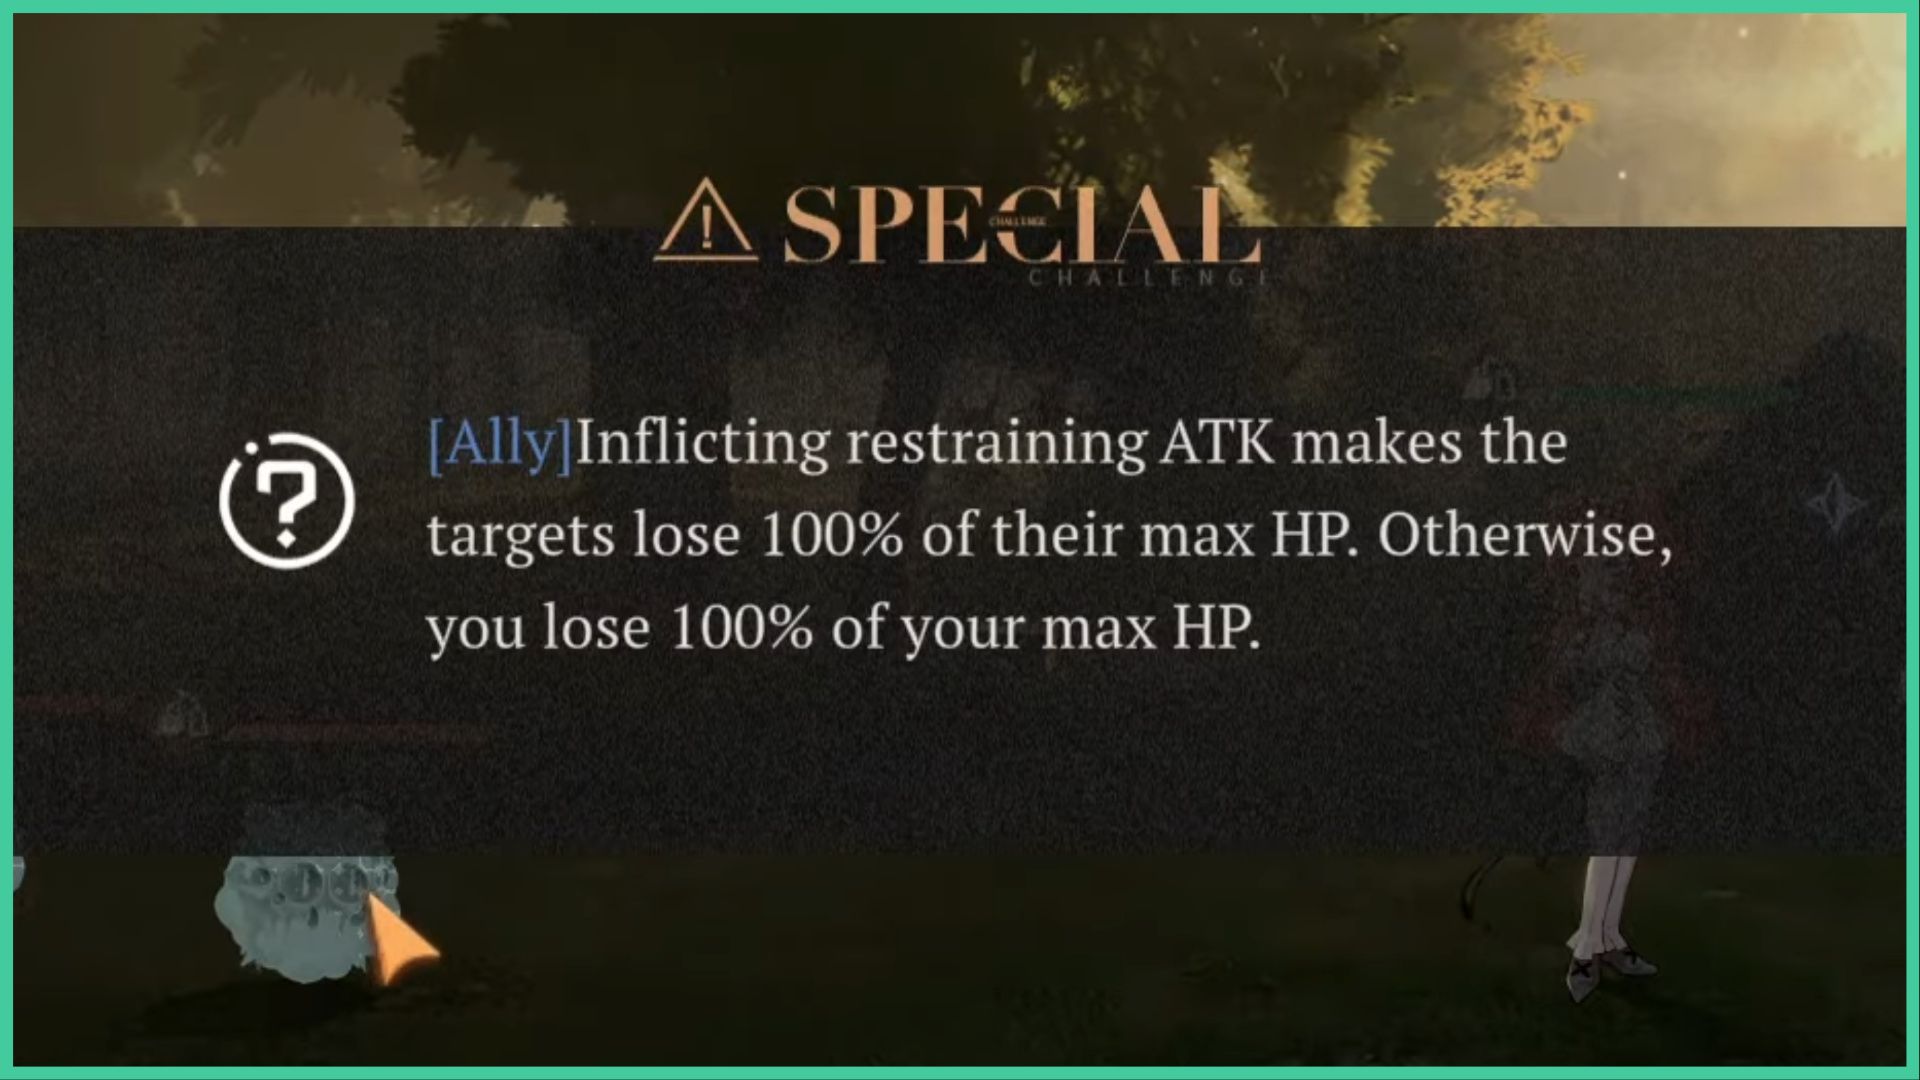 feature image for our reverse 1999 restraining training guide, the image features a screenshot from the camping guide challenge with the Special Challenge box pop up that reads "ally inflicting restraining attack makes the targets lose 100% of their max hp, otherwise you lose 100% of your max hp" in the background is sonetto preparing to attack and one of the enemy blobs to the left